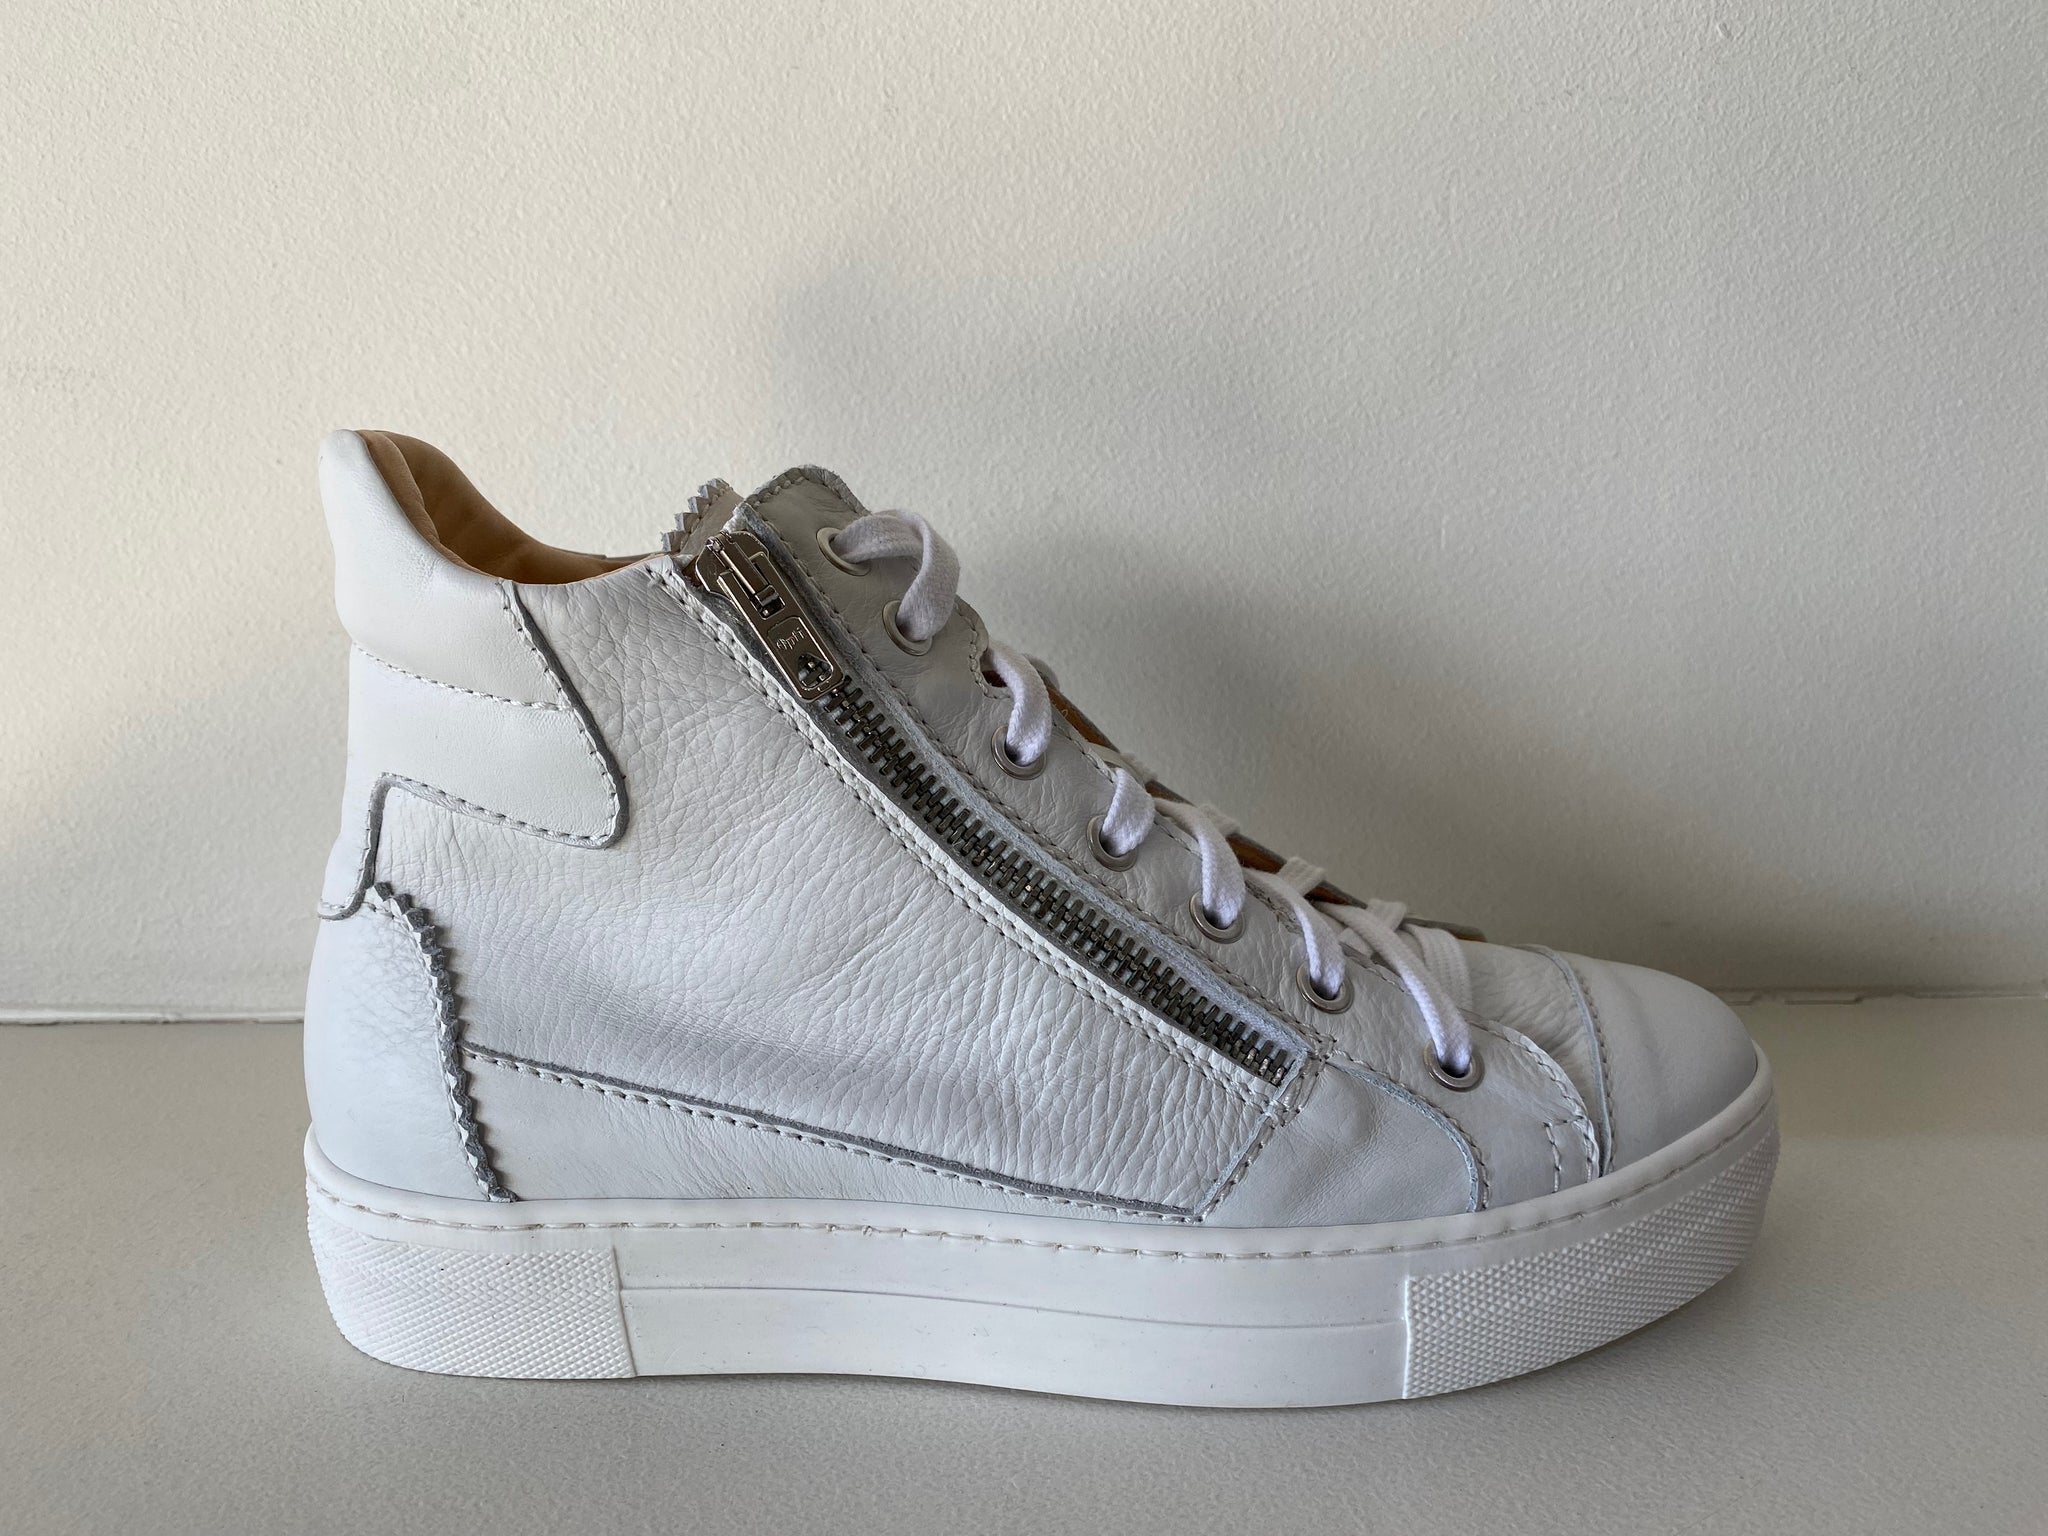 White Leather High Top sneaker